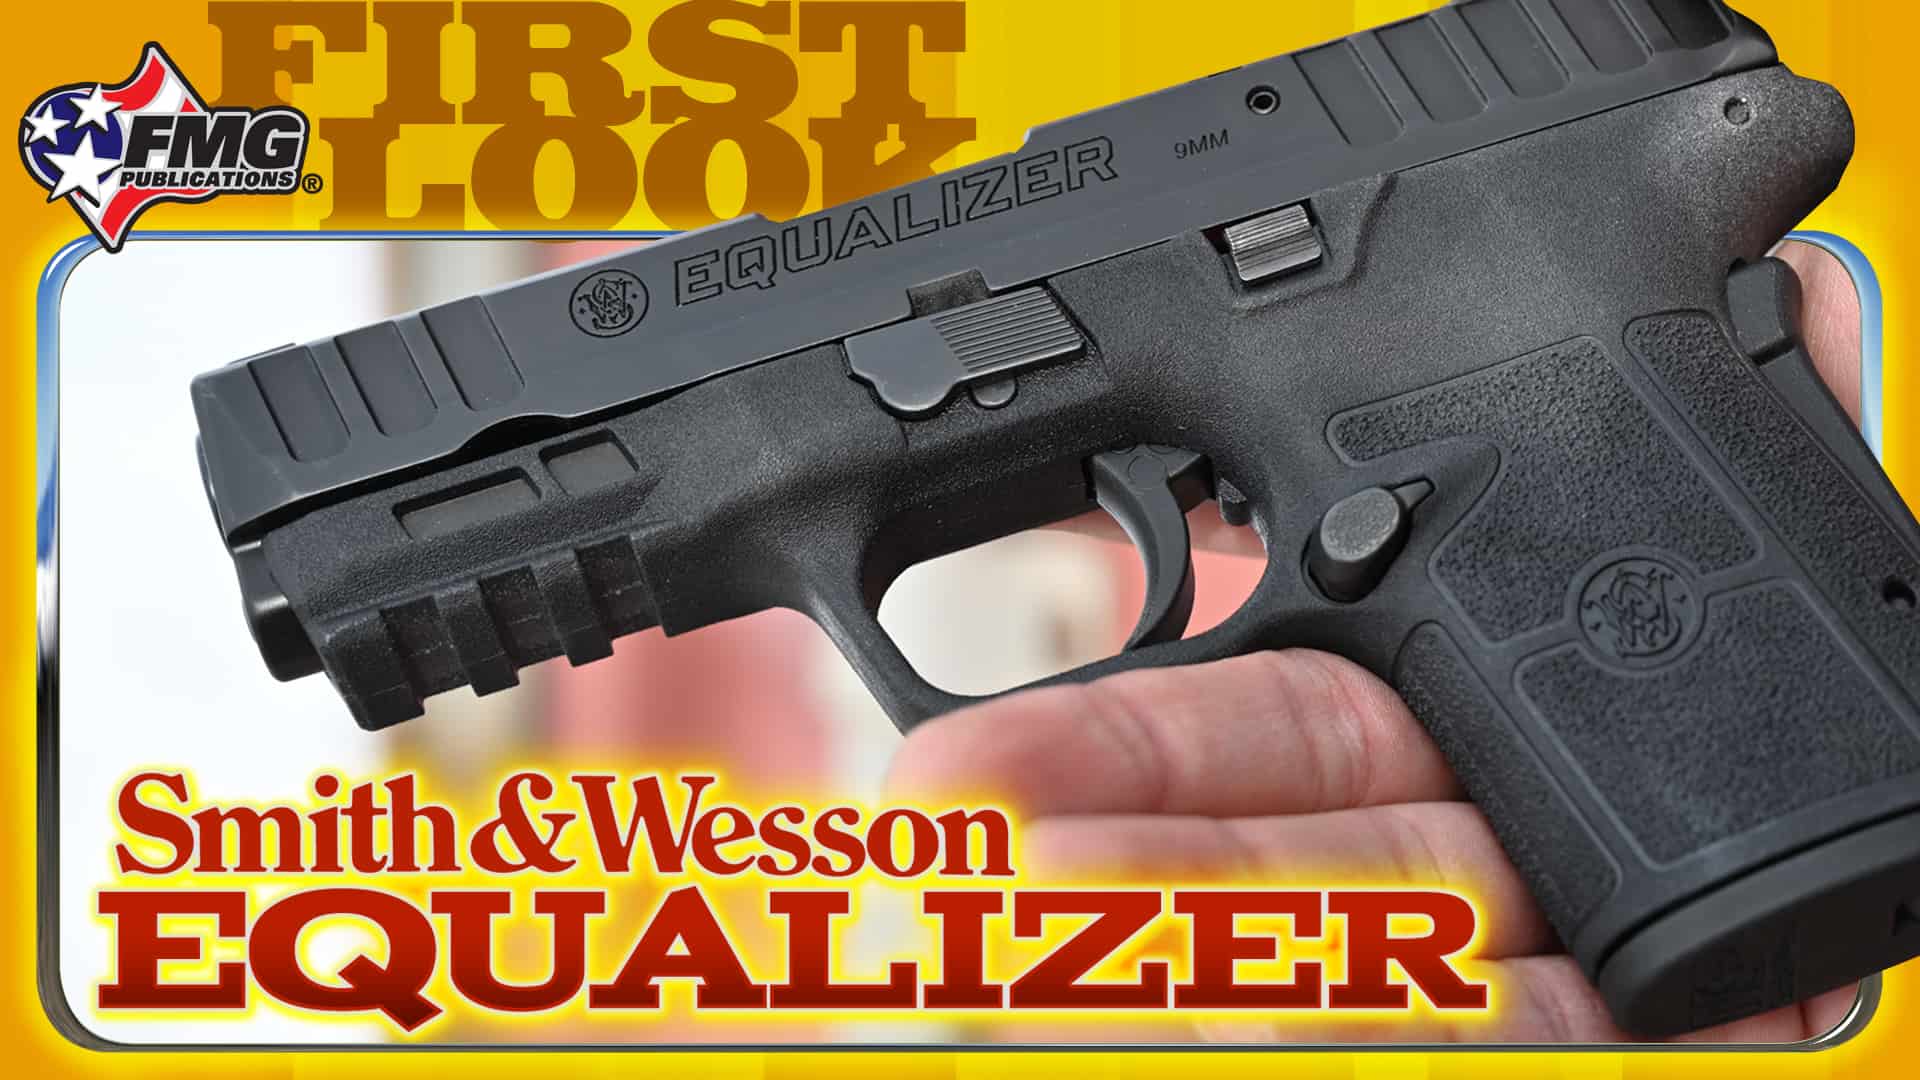 Smith & Wesson Equalizer